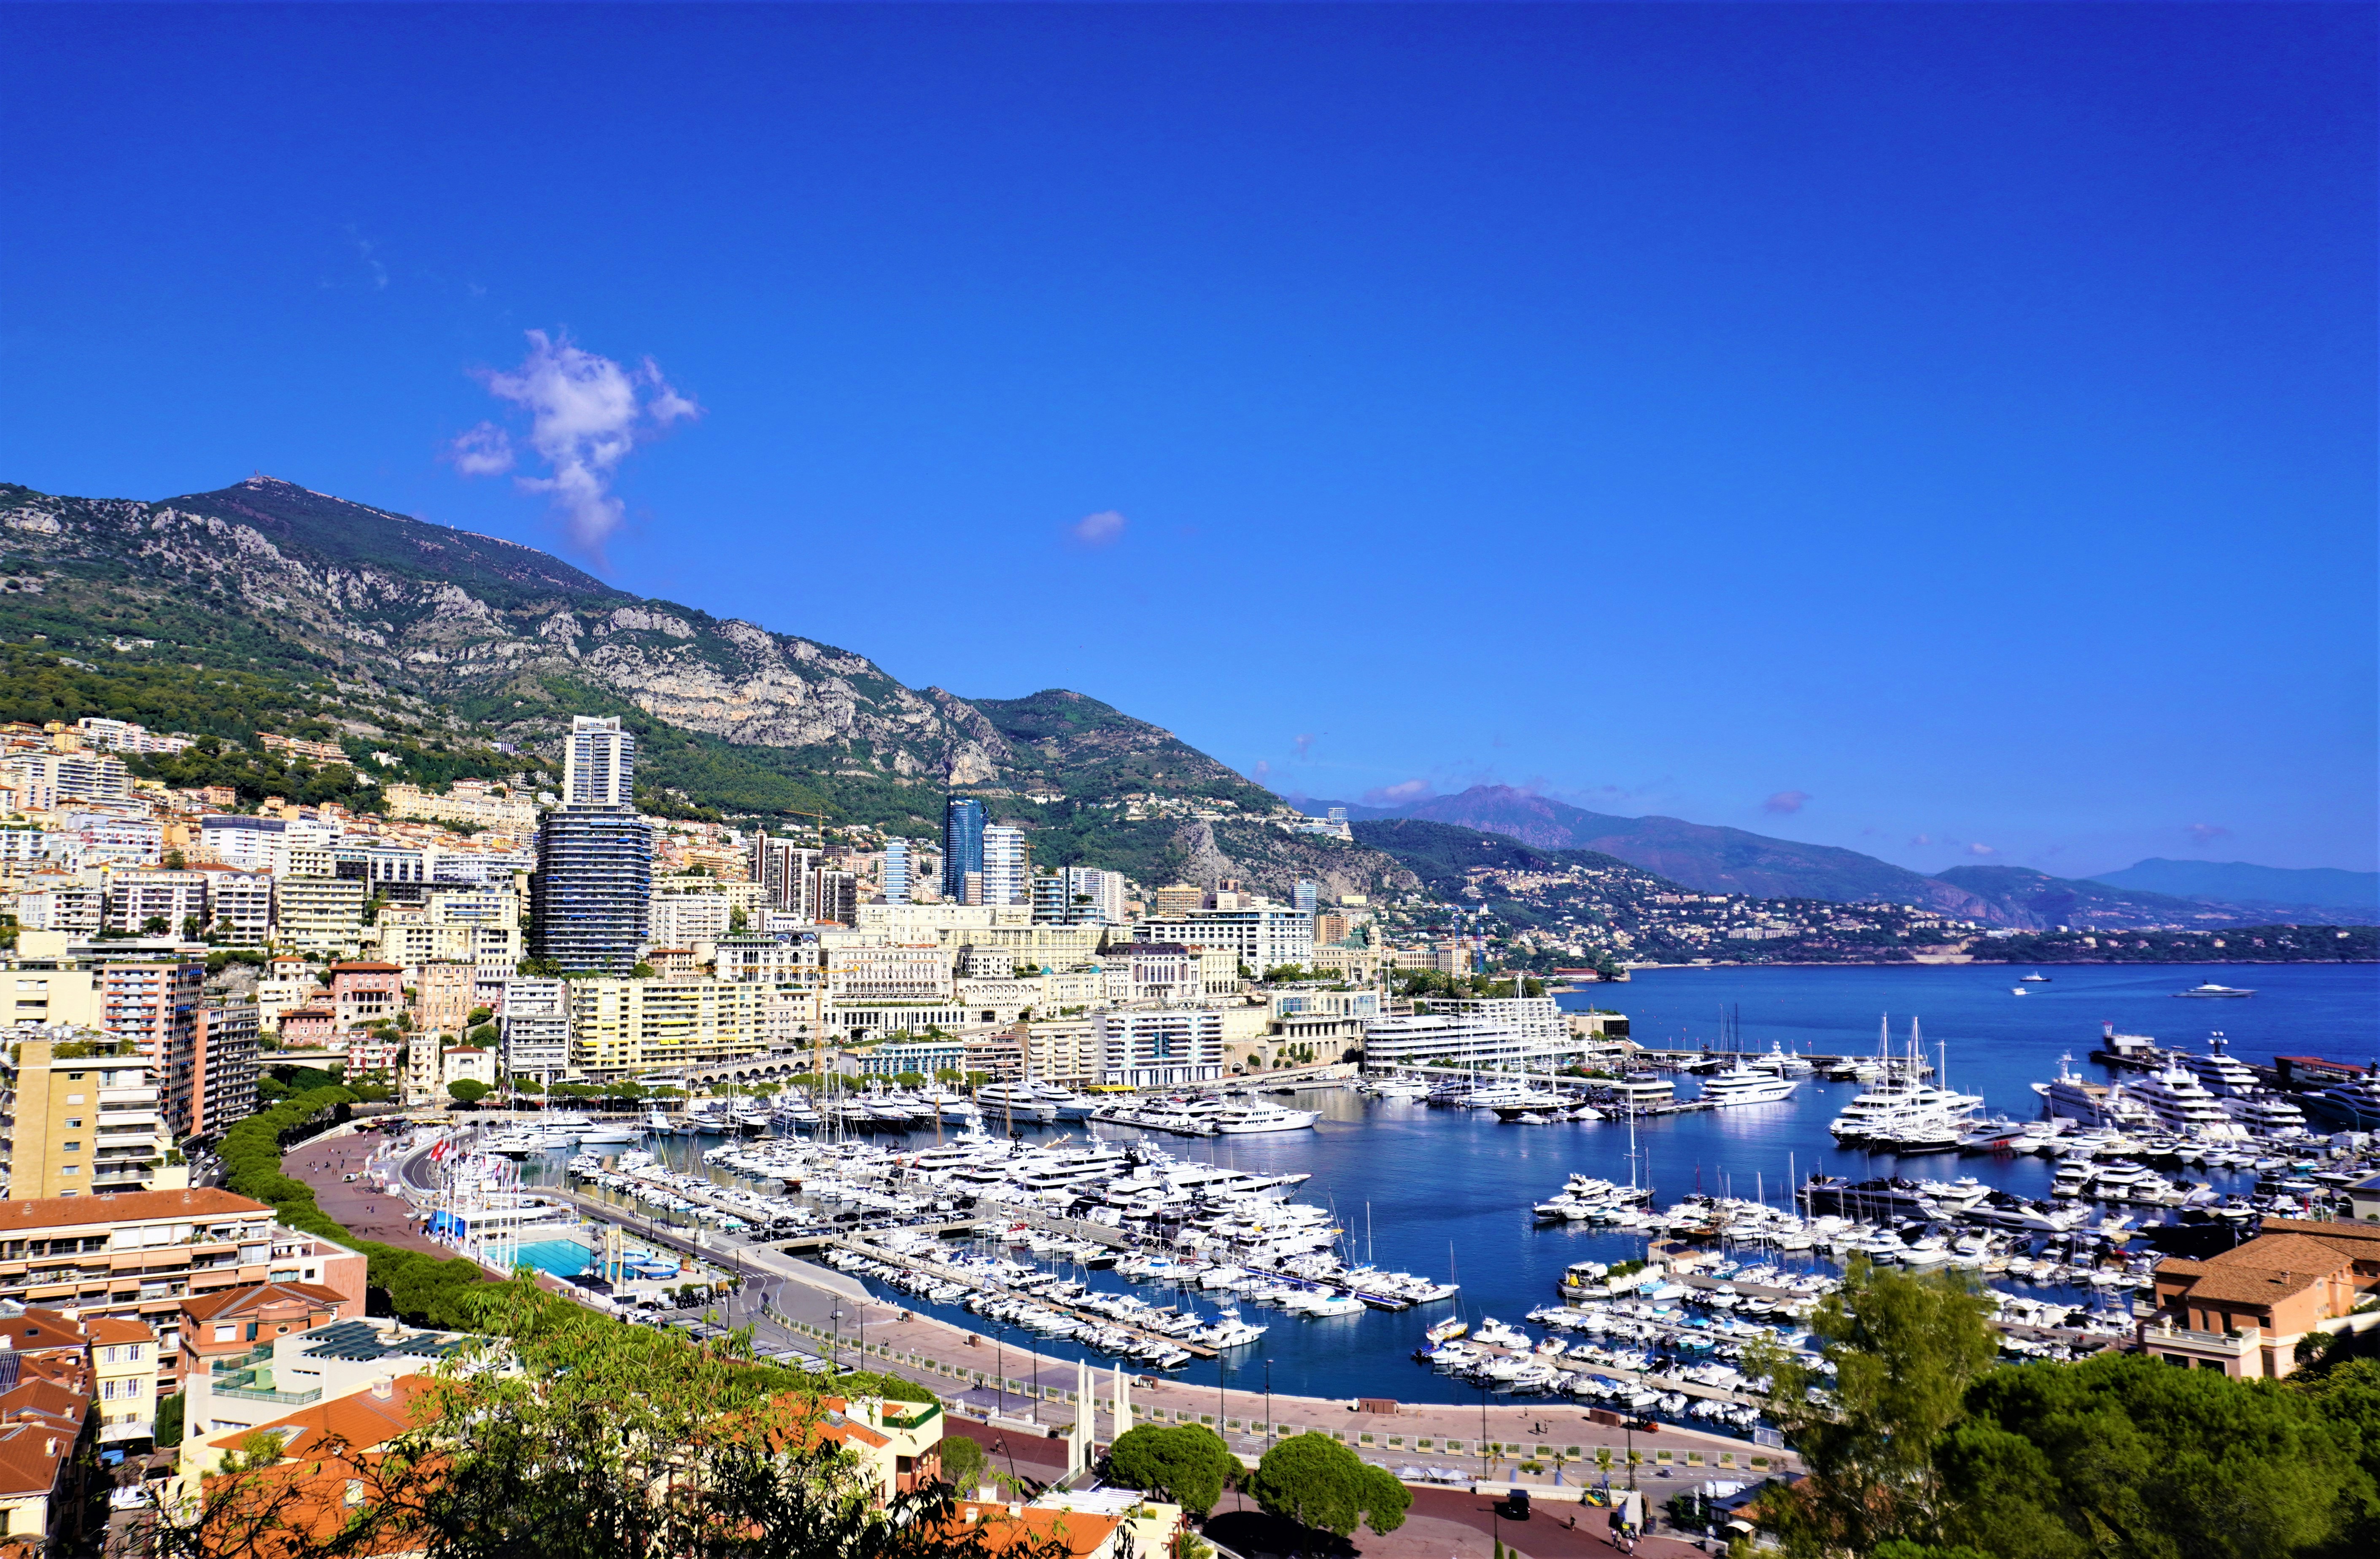 city,sea,landscape,view,travel,sky,architecture,monaco,panorama,town,cityscape,europe,building,coast,bay,panoramic,mediterranean,water,tourism,spain,urban,summer,port,beach,croatia,france,buildings,old,roof,greece